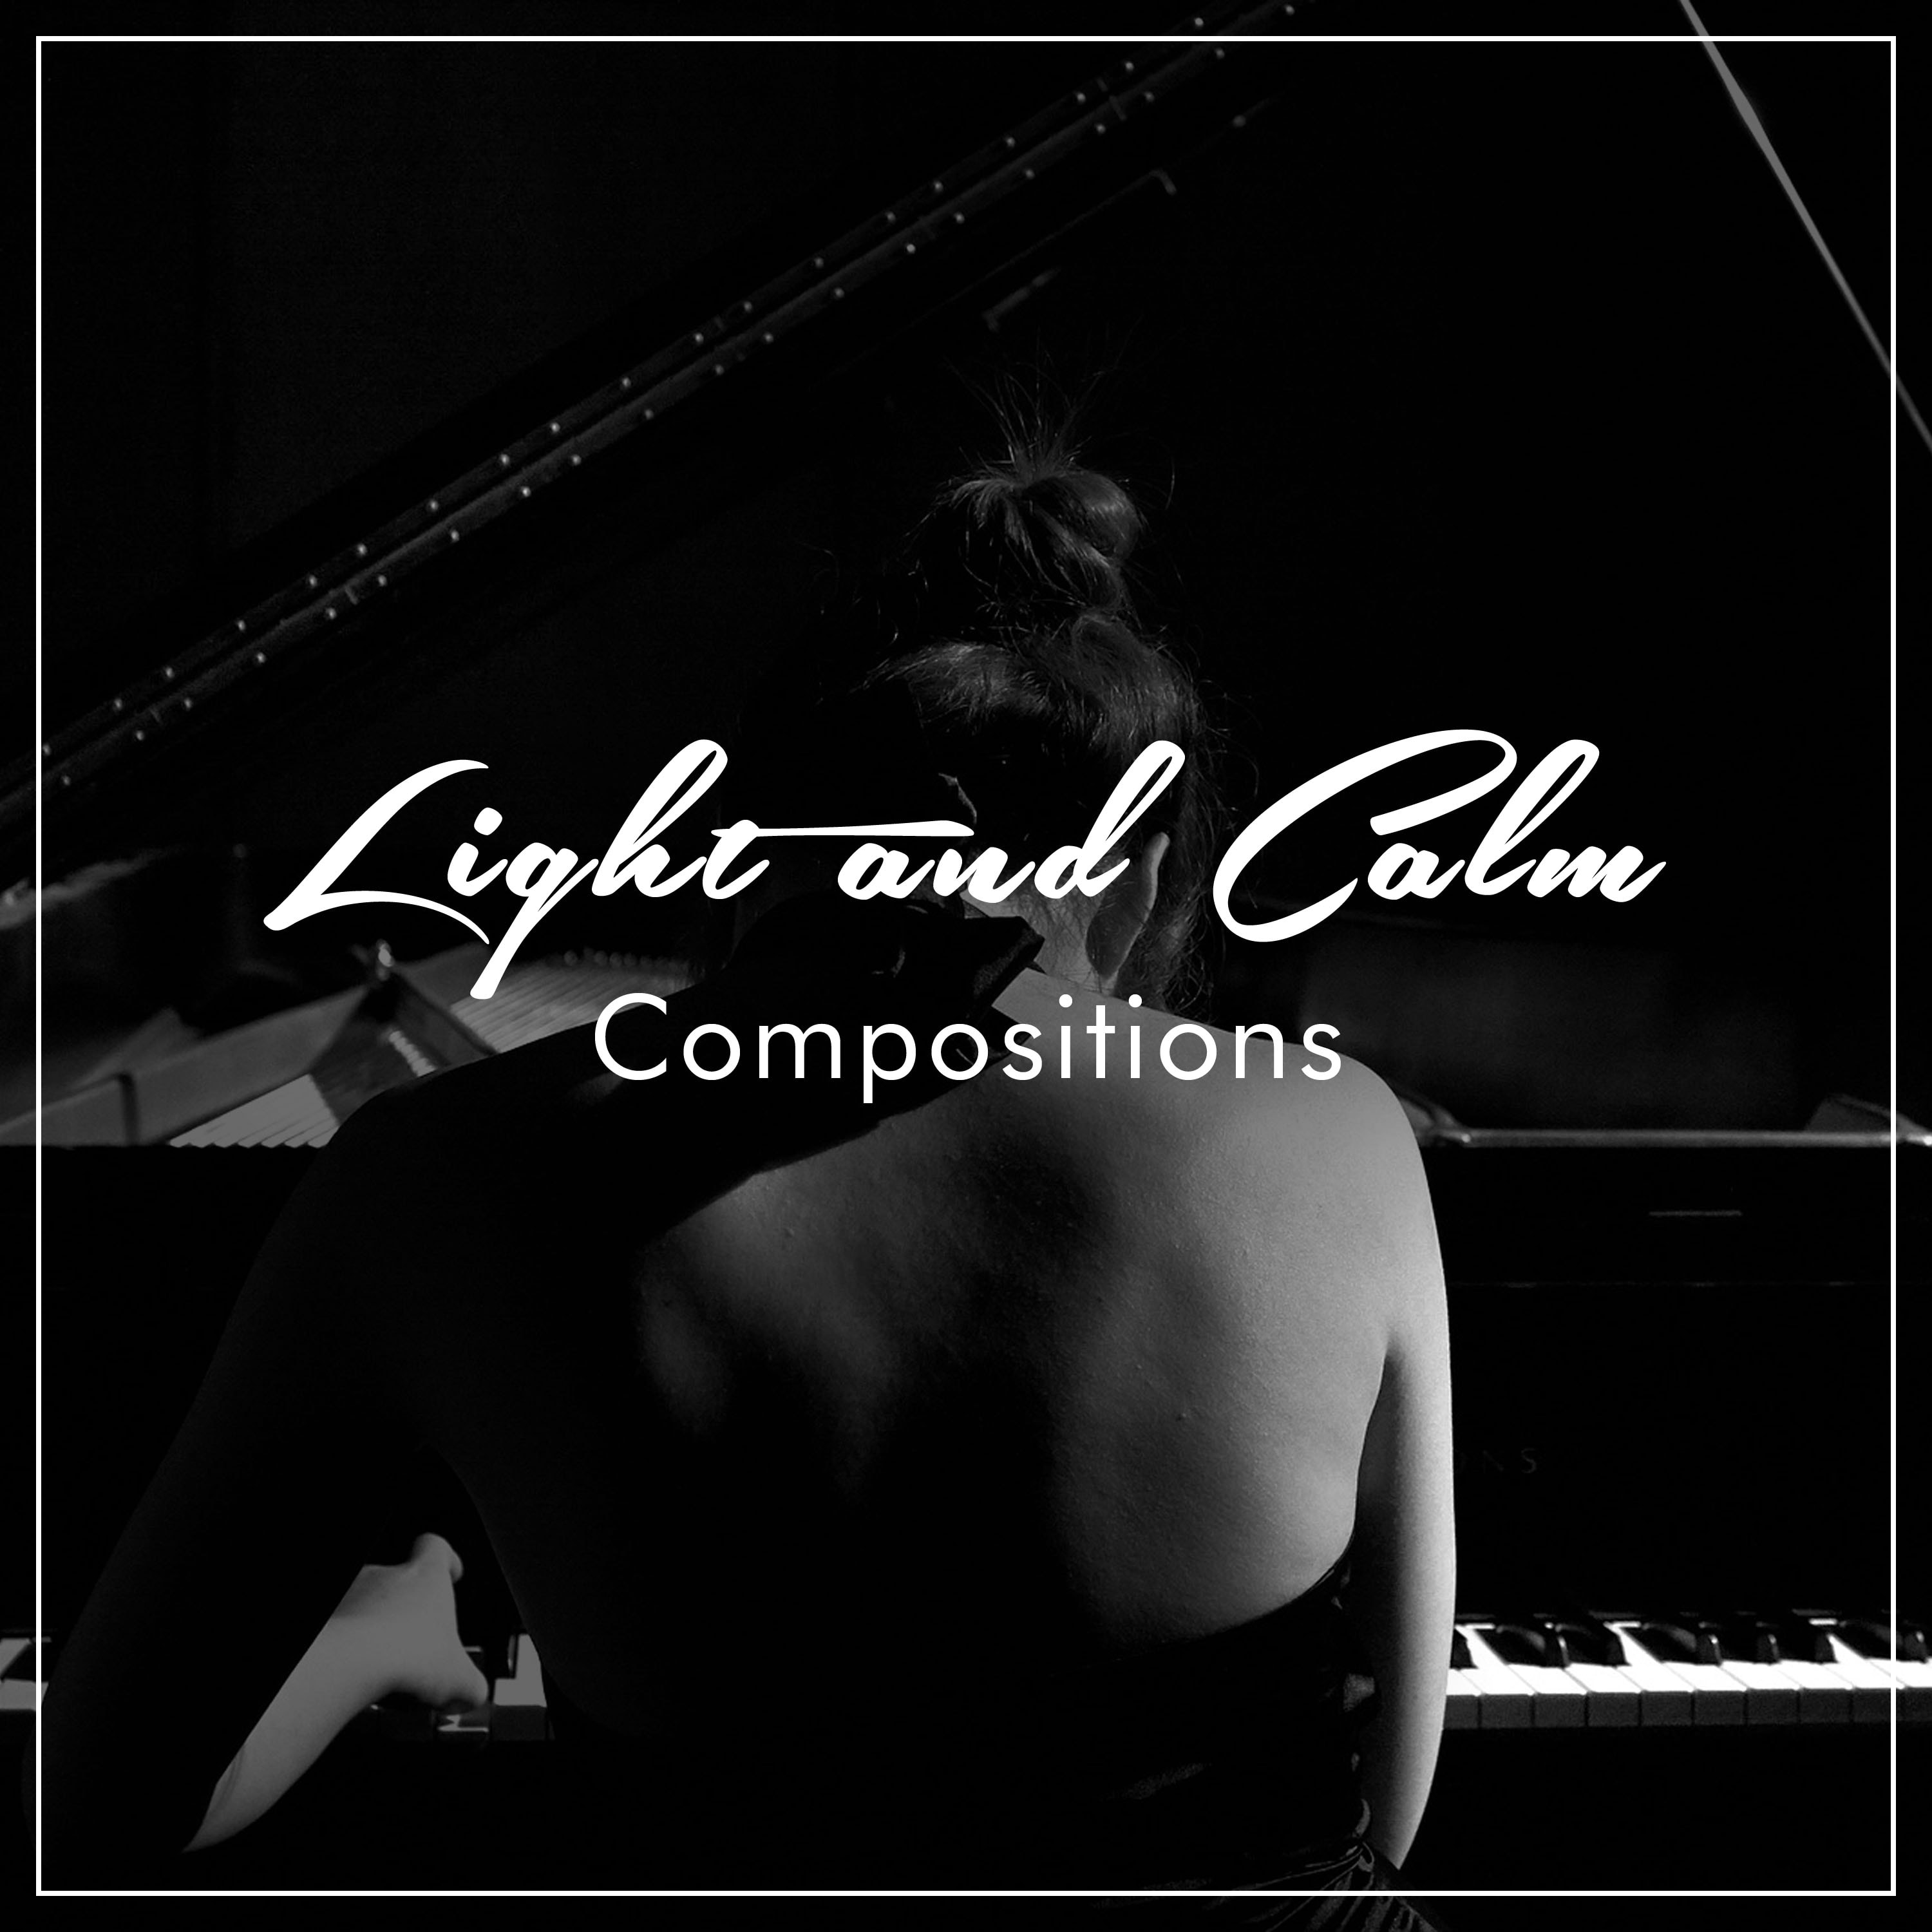 #17 Light and Calm Compositions